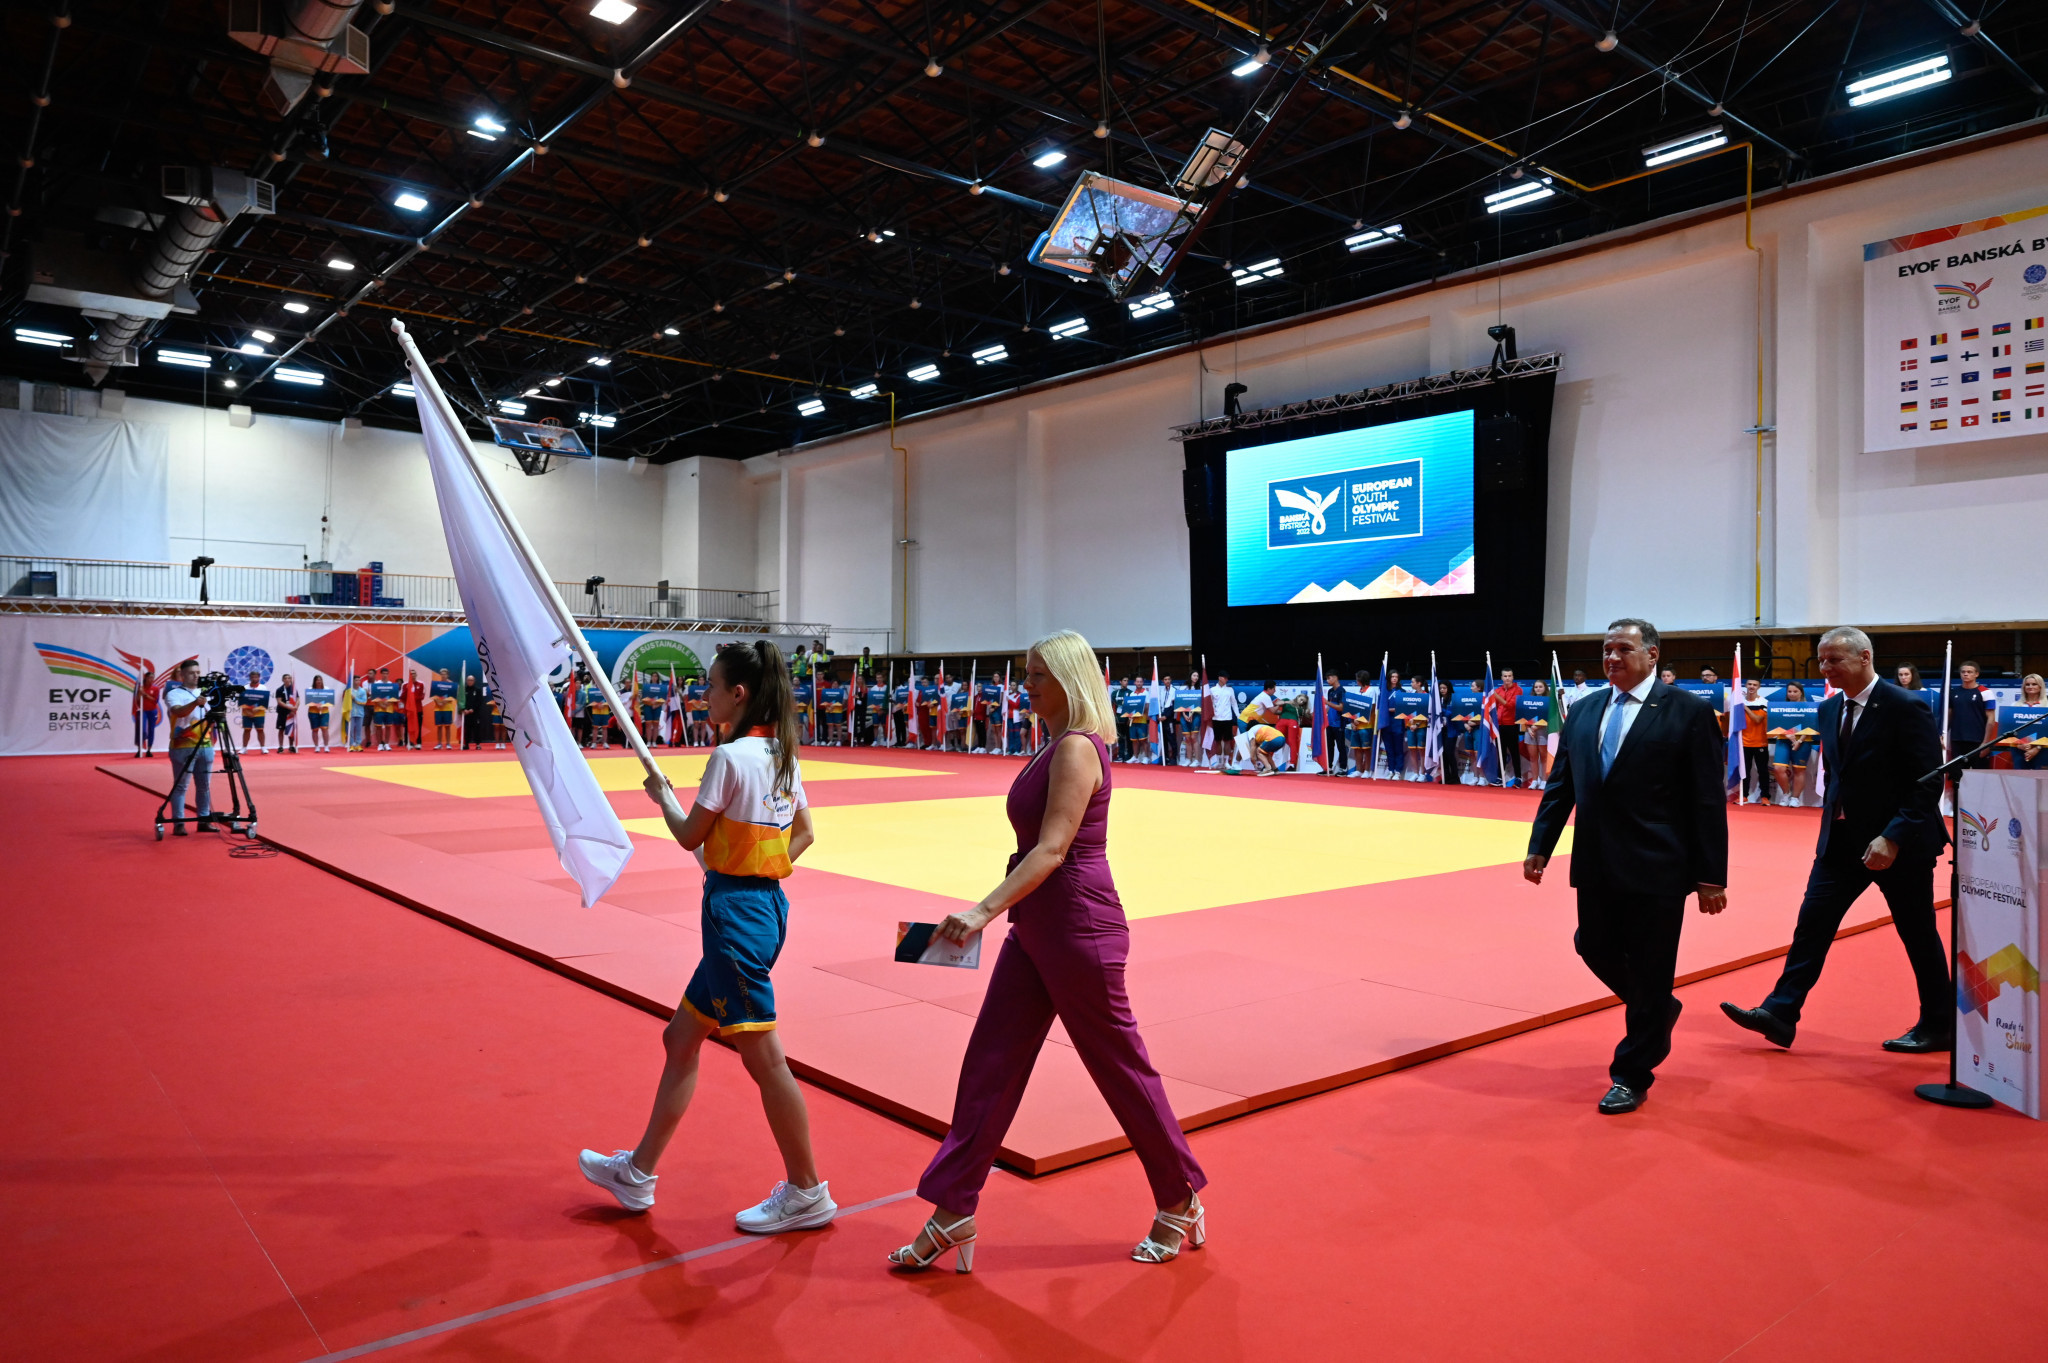 Countdown to next Summer EYOF begins at Closing Ceremony prior to collapsing flagbearer 